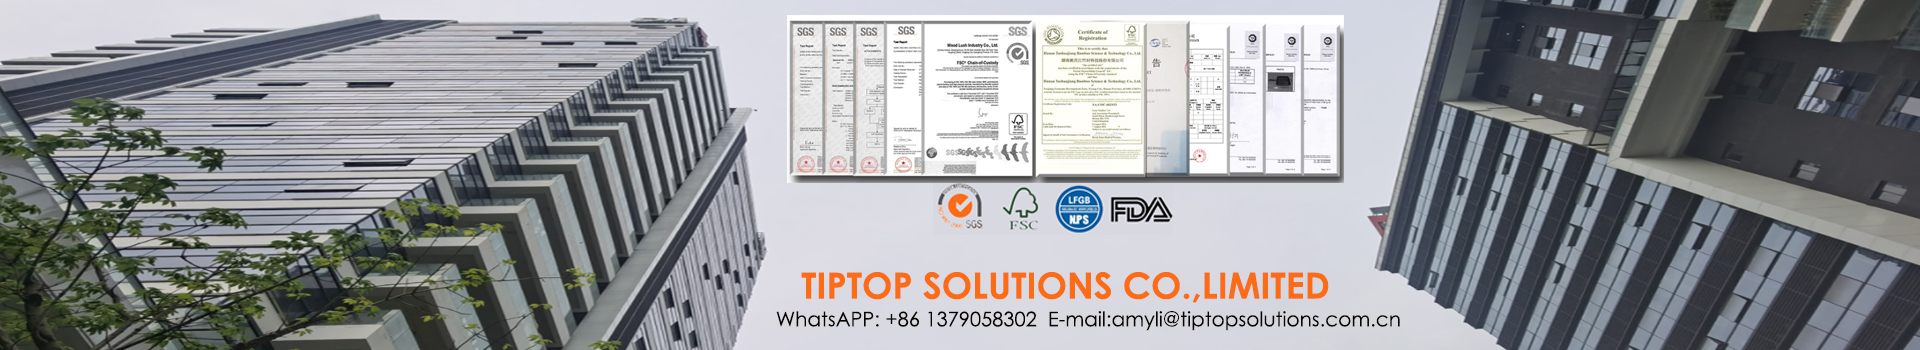 TIPTOP SOLUTIONS CO.,LIMITED